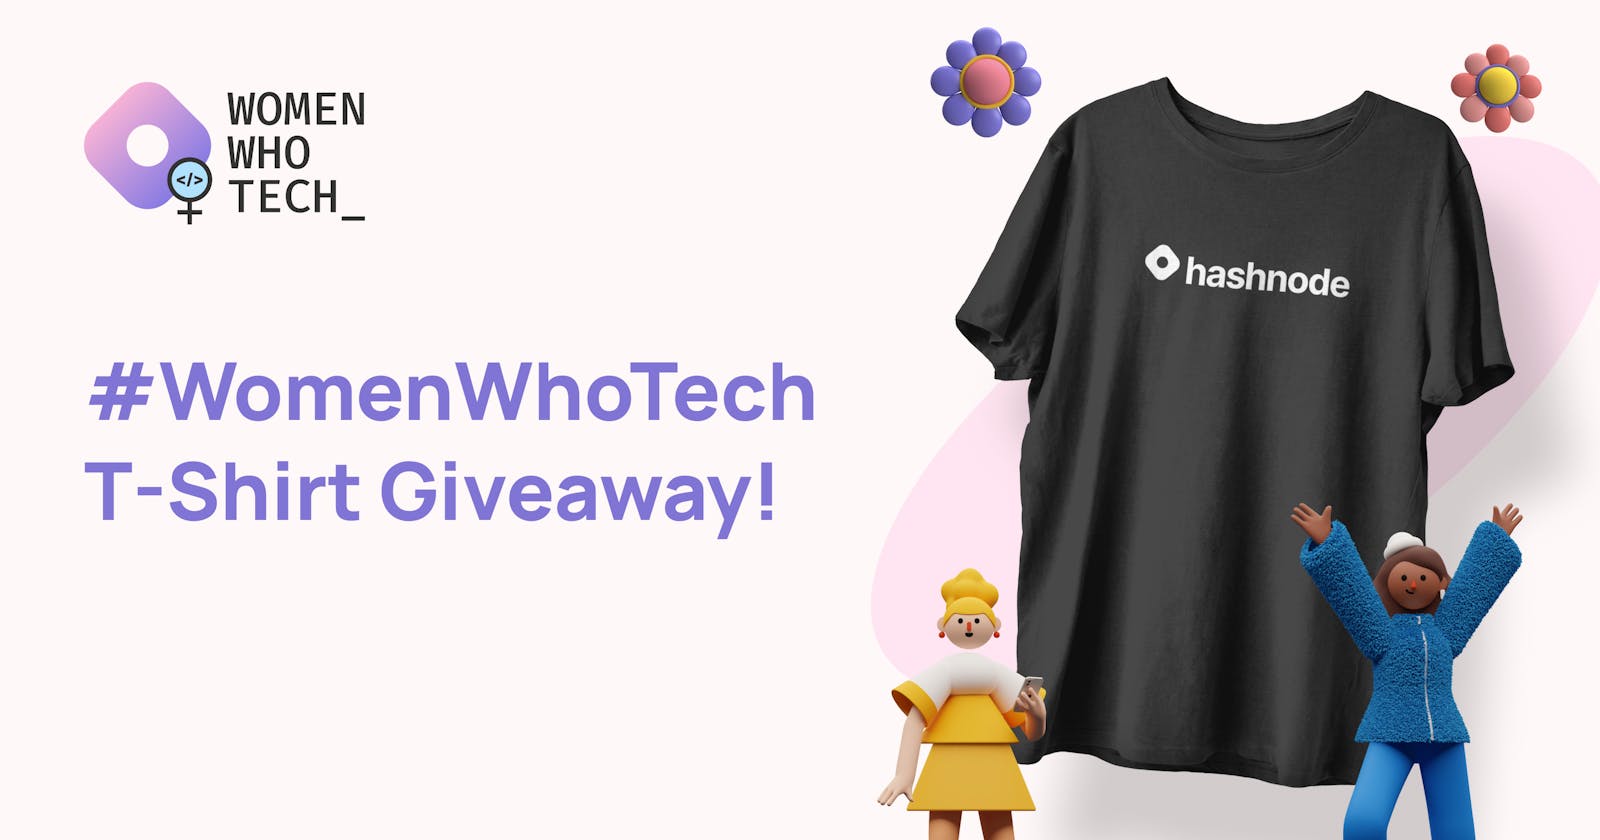 Share your stories for the #WomenWhoTech writing challenge & win a Hashnode T-Shirt!